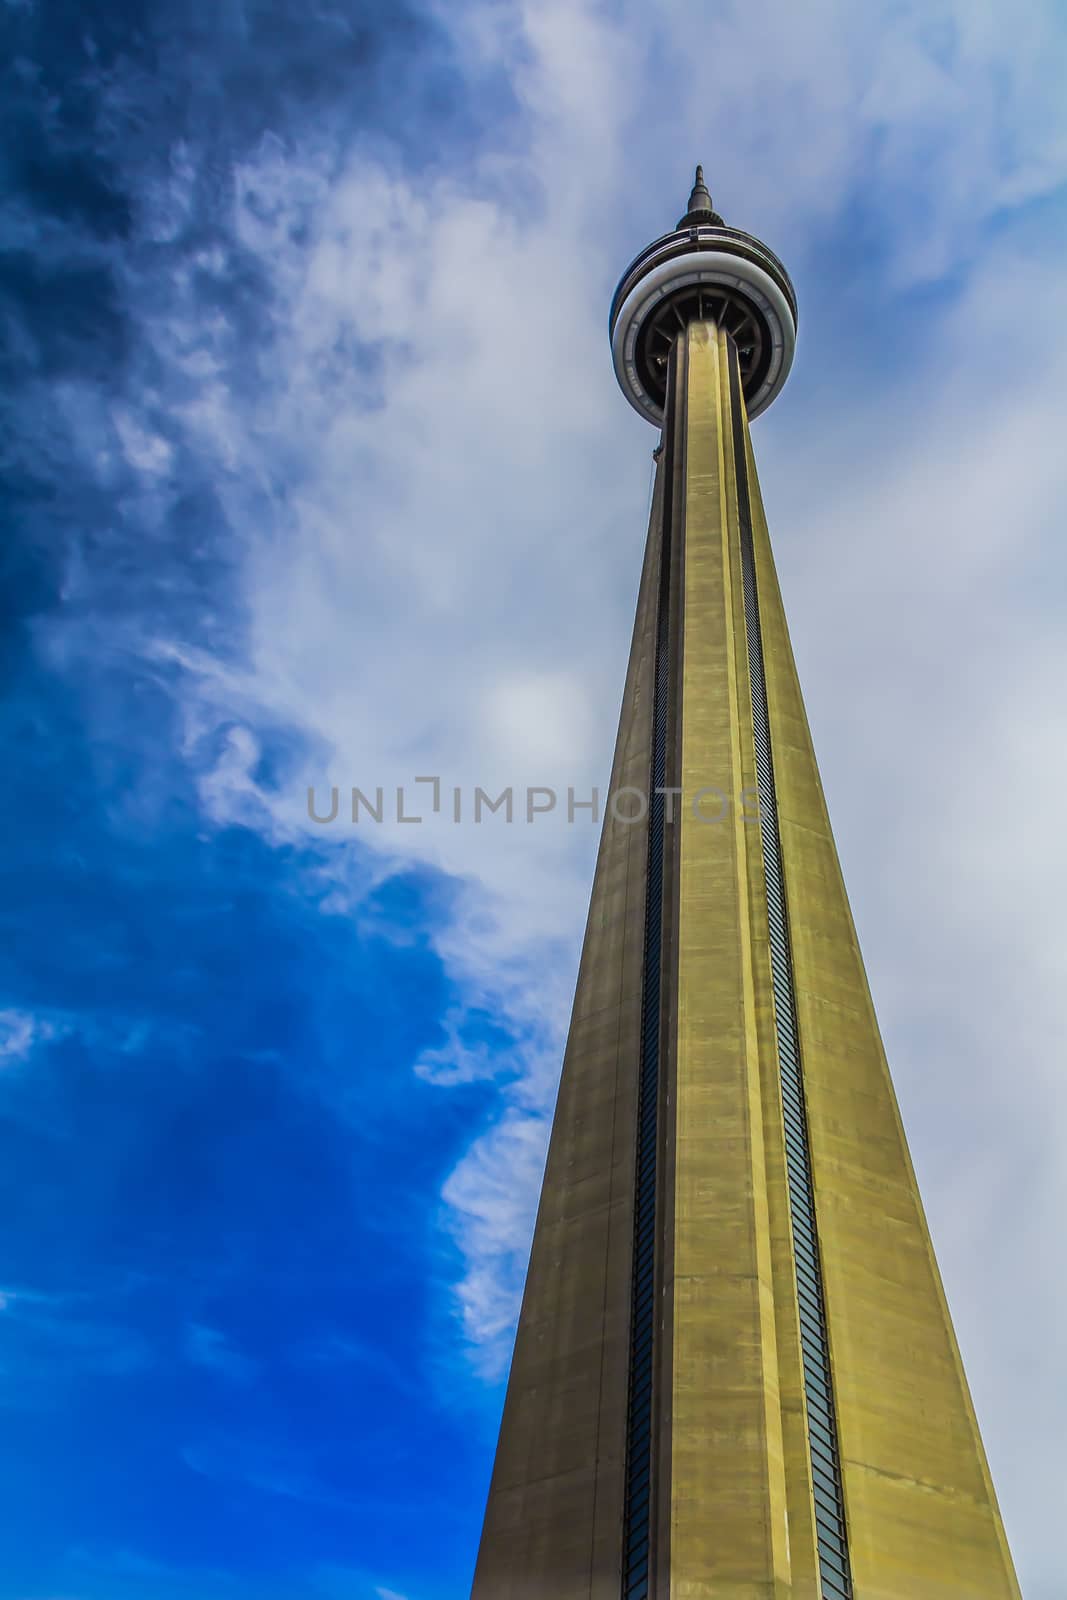 CN Tower in Toronto, Canada by petkolophoto